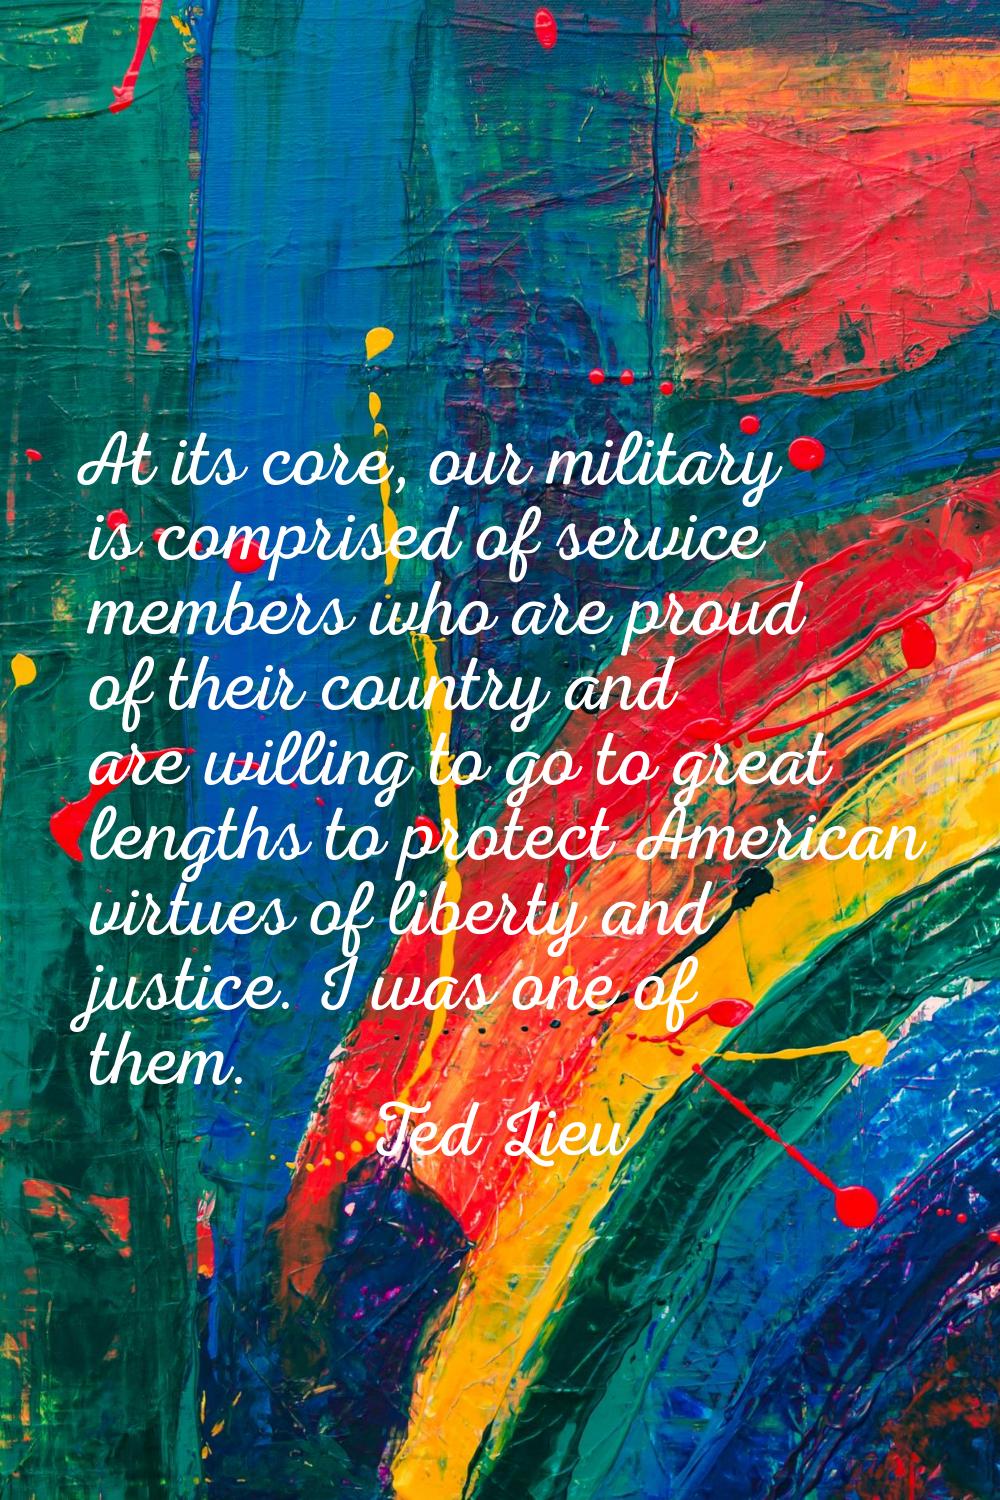 At its core, our military is comprised of service members who are proud of their country and are wi